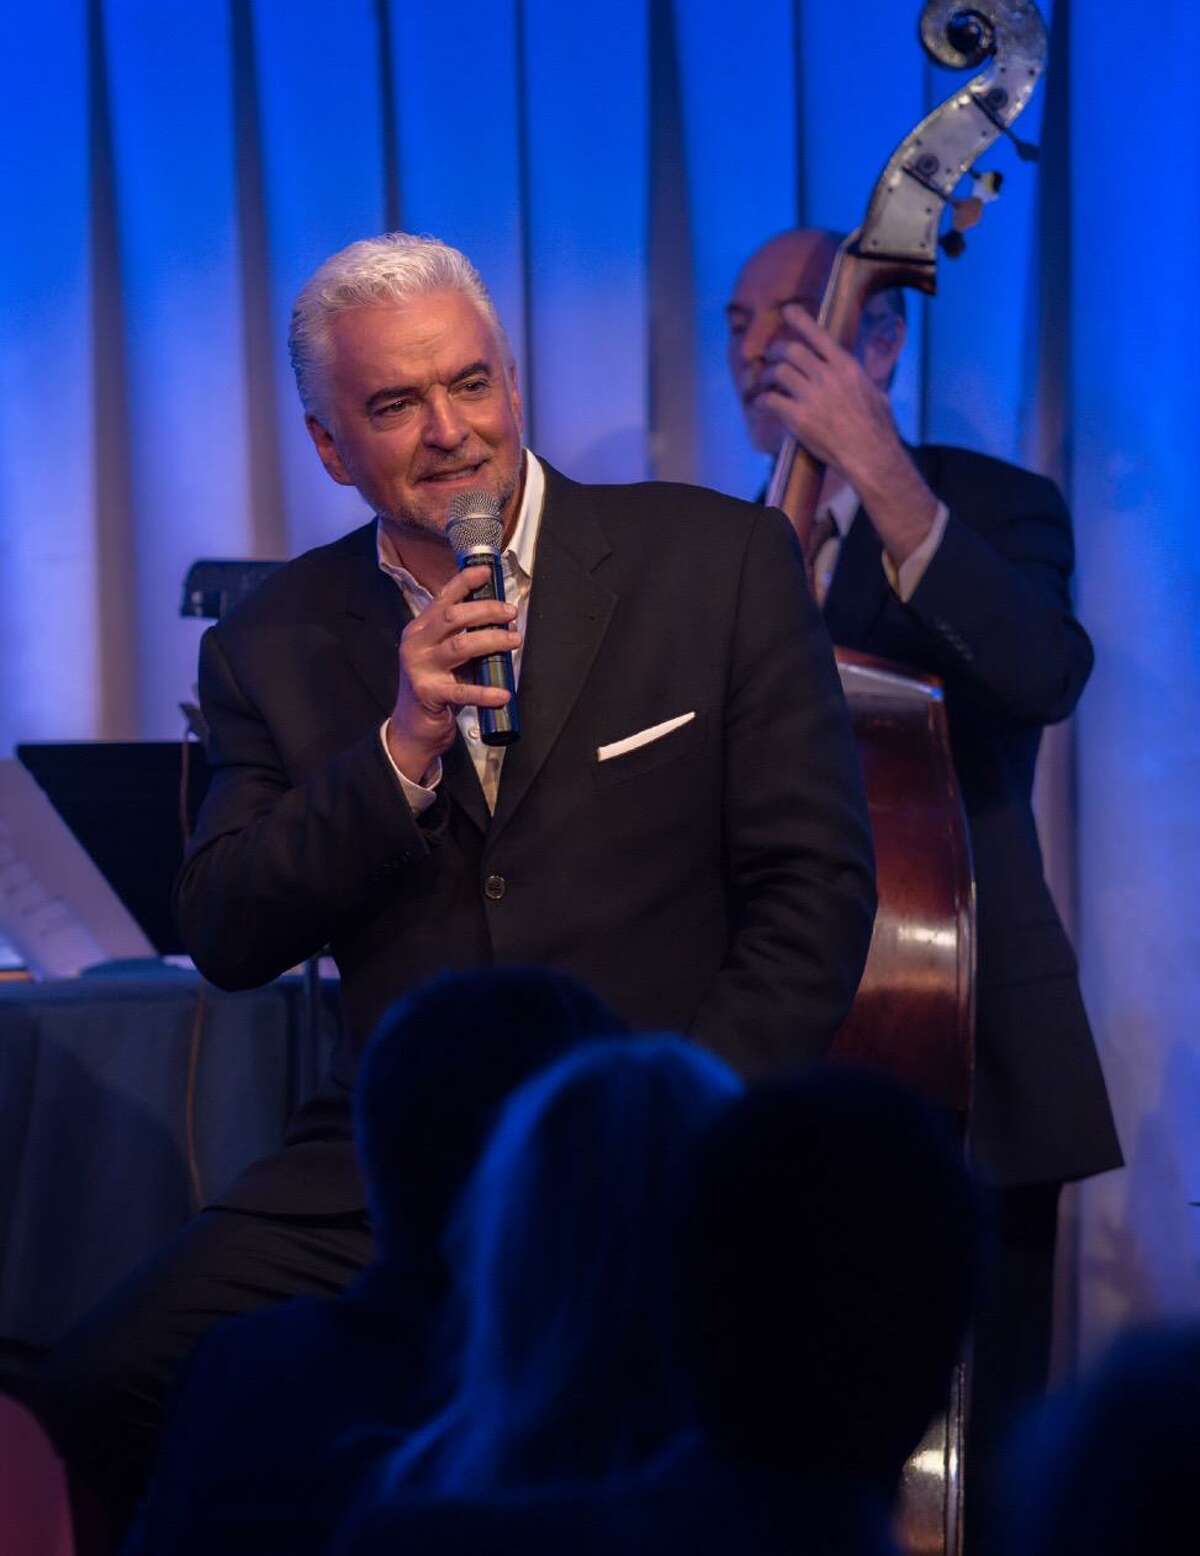 John O’Hurley: A Man with Standards, storytelling, songs and humor is on Jan. 26 at 5 p.m. at Ridgefield Playhouse.